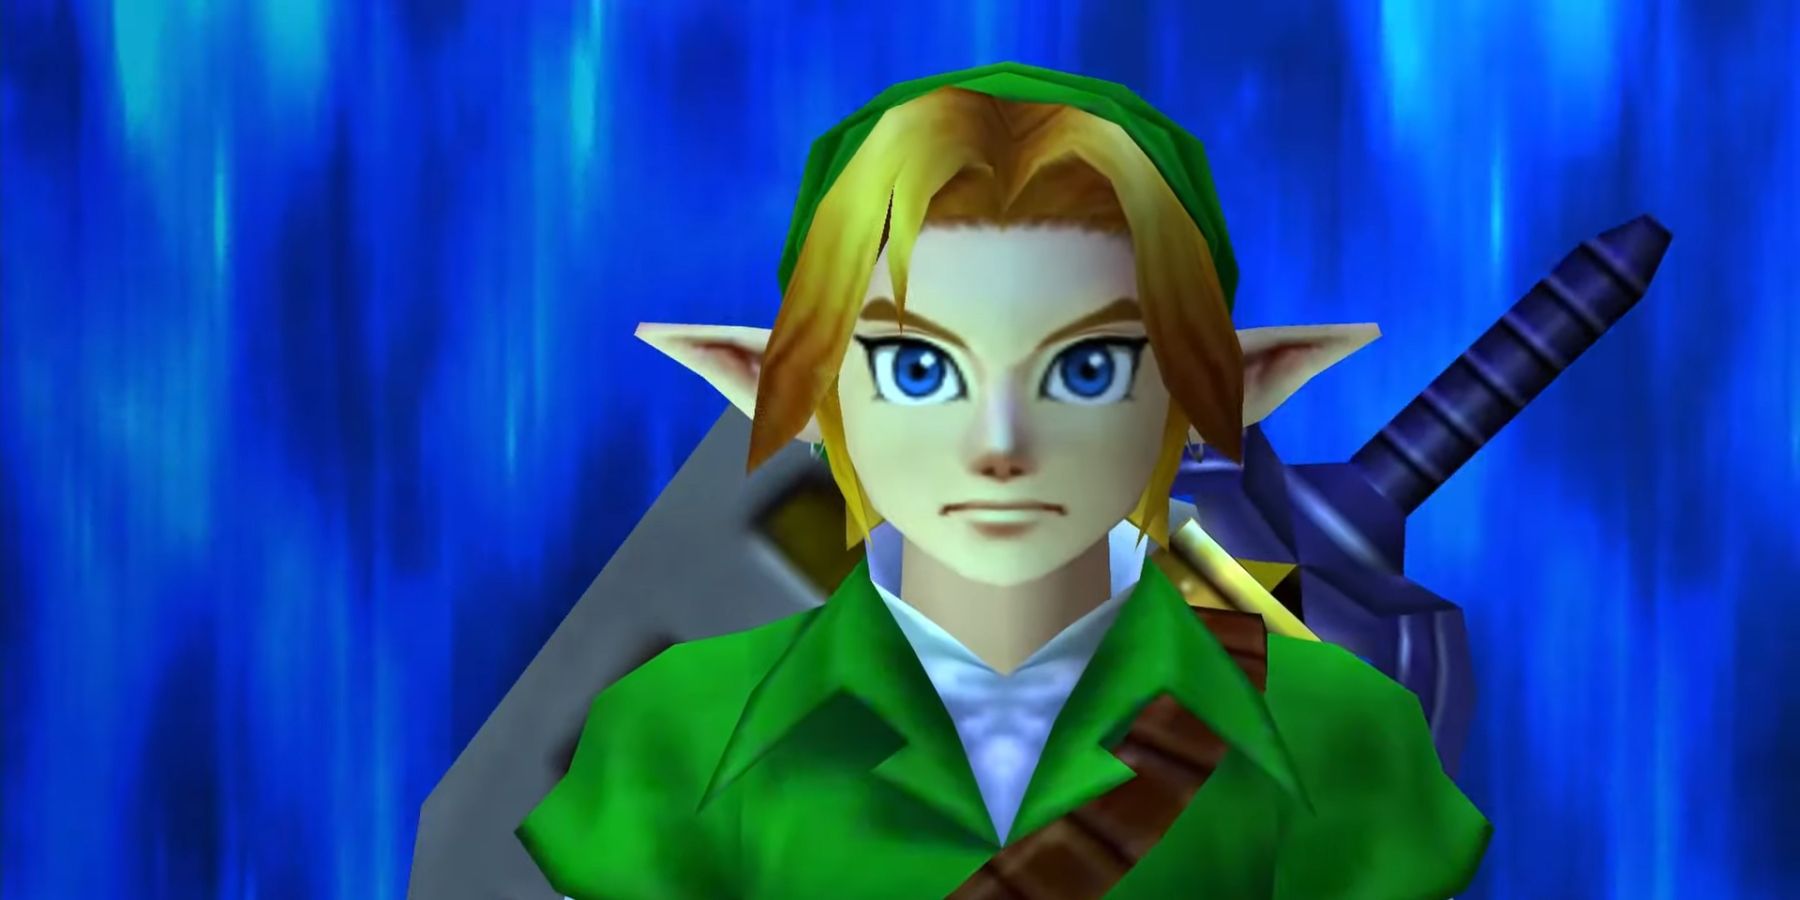 5. "Link with Blue Hair" by Ocarina of Time - wide 7